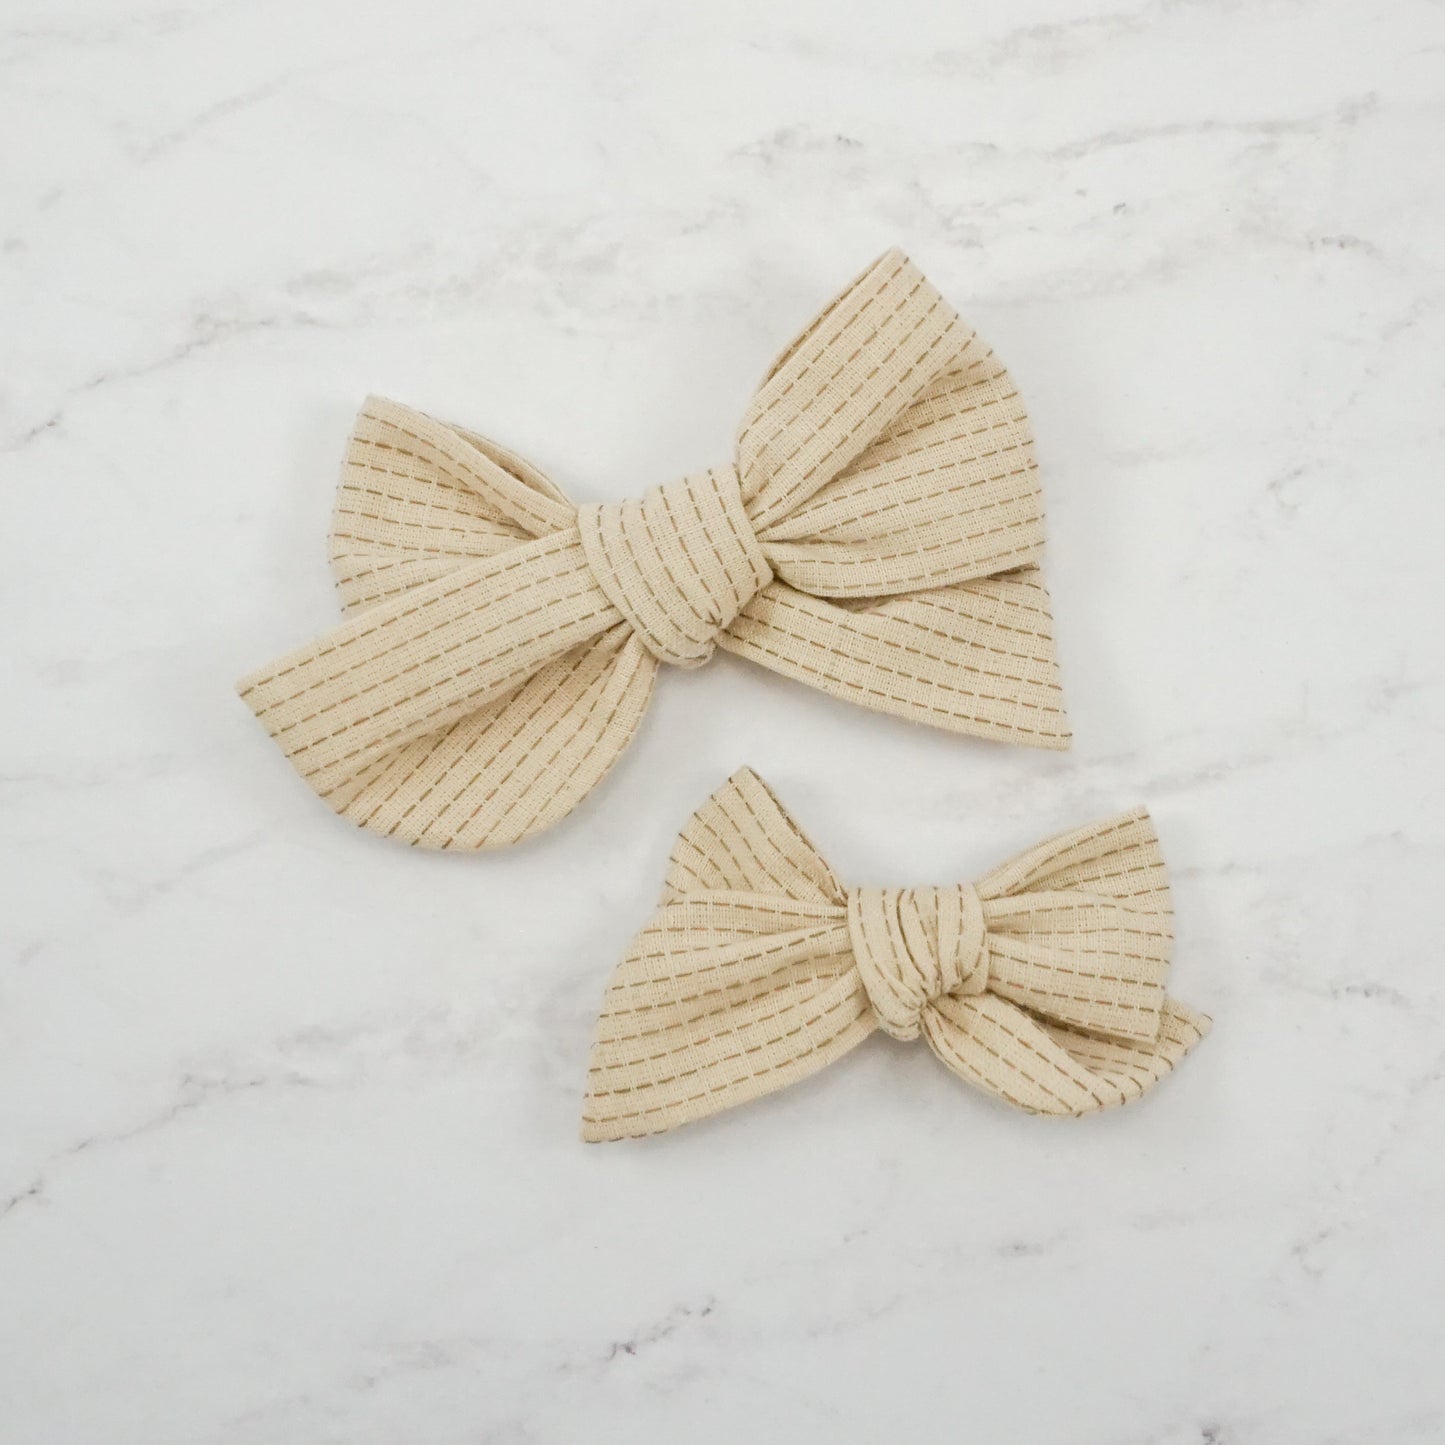 Handtied Fabric Bow - Cream Topstitch Embroidered